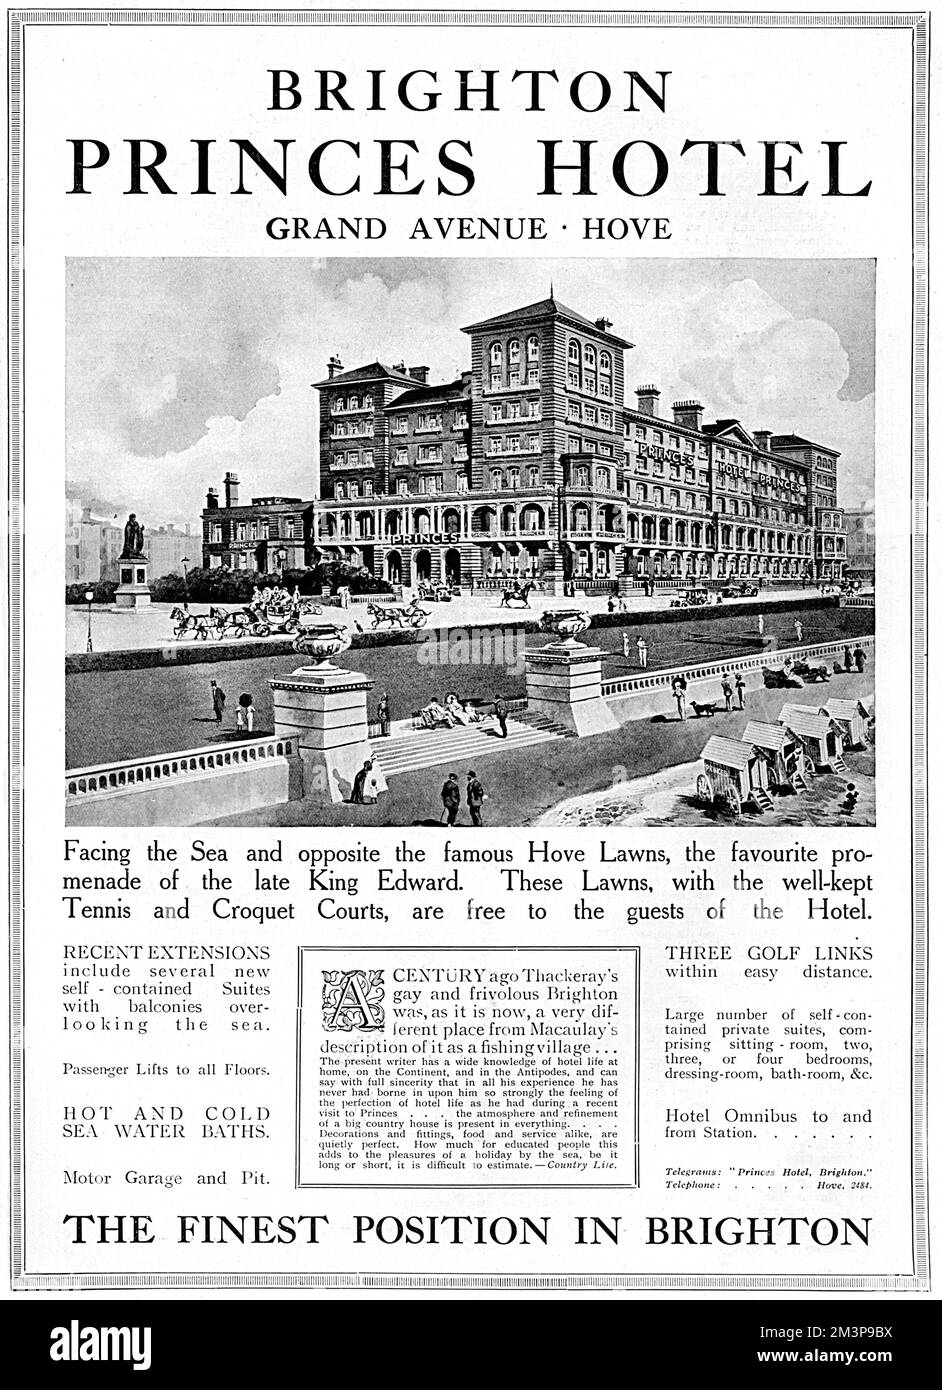 An advertisement for Princes Hotel, Grand Avenue, Hove facing the sea opposite the famous Hove Lawns, the favourite promenade of King Edward VII.  The advert claims the hotel has the finest position in Brighton.  During the First World War, when holidays in the fashionable resorts of Northern France were impossible, Brighton attracted members of society.  It was also popular with convalescent soldiers.       Date: 1917 Stock Photo